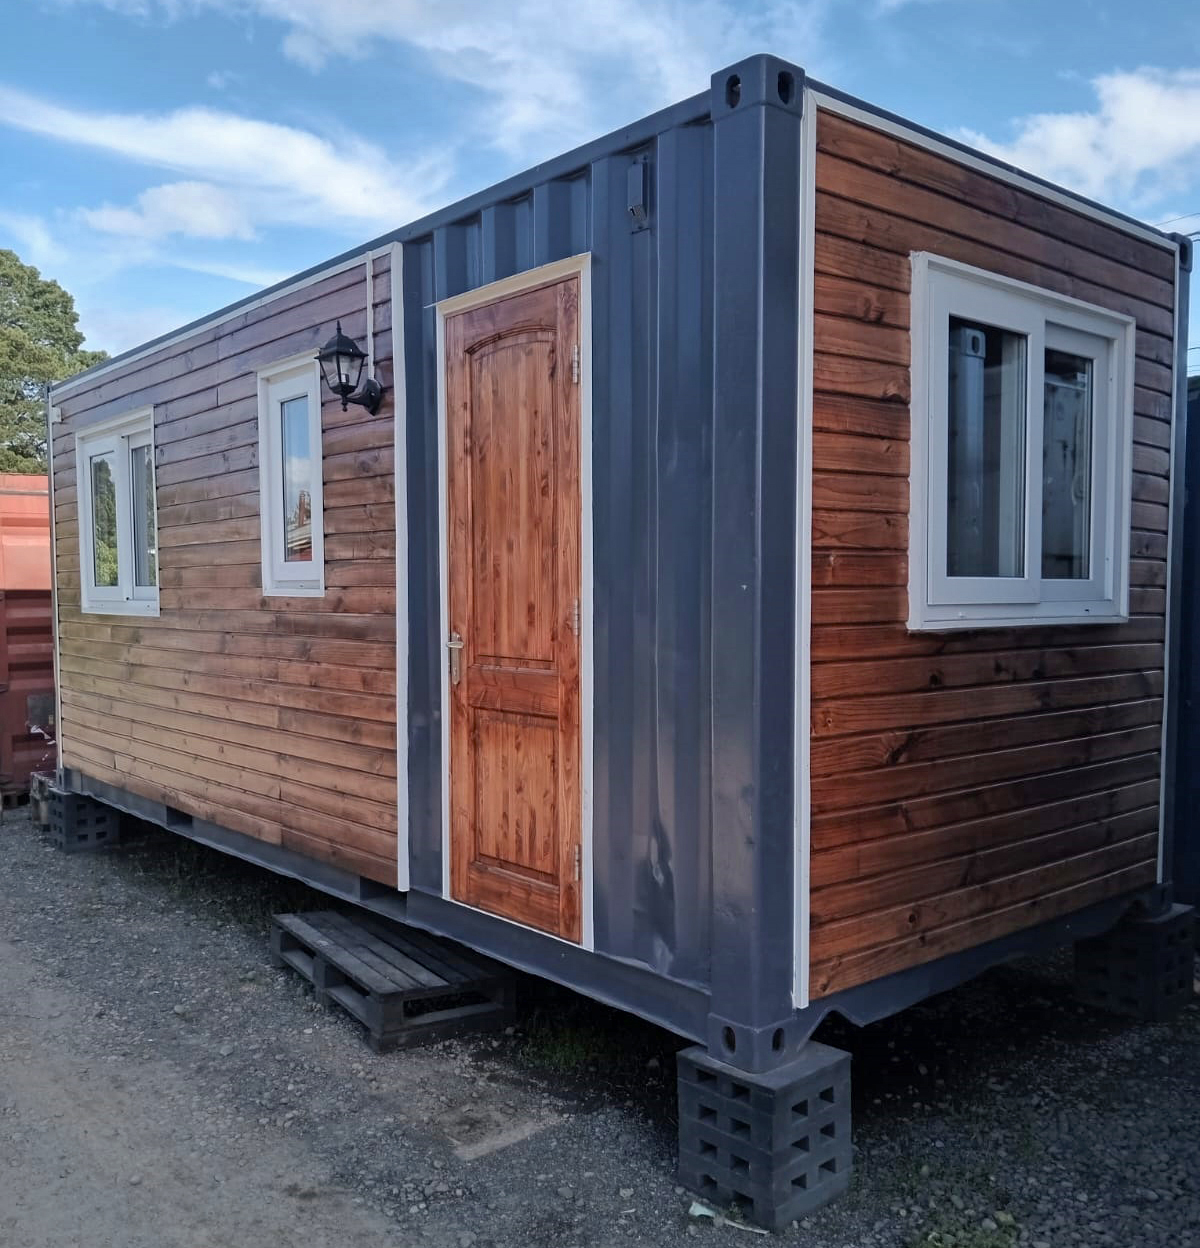 Tiny house 20 - JBL containers